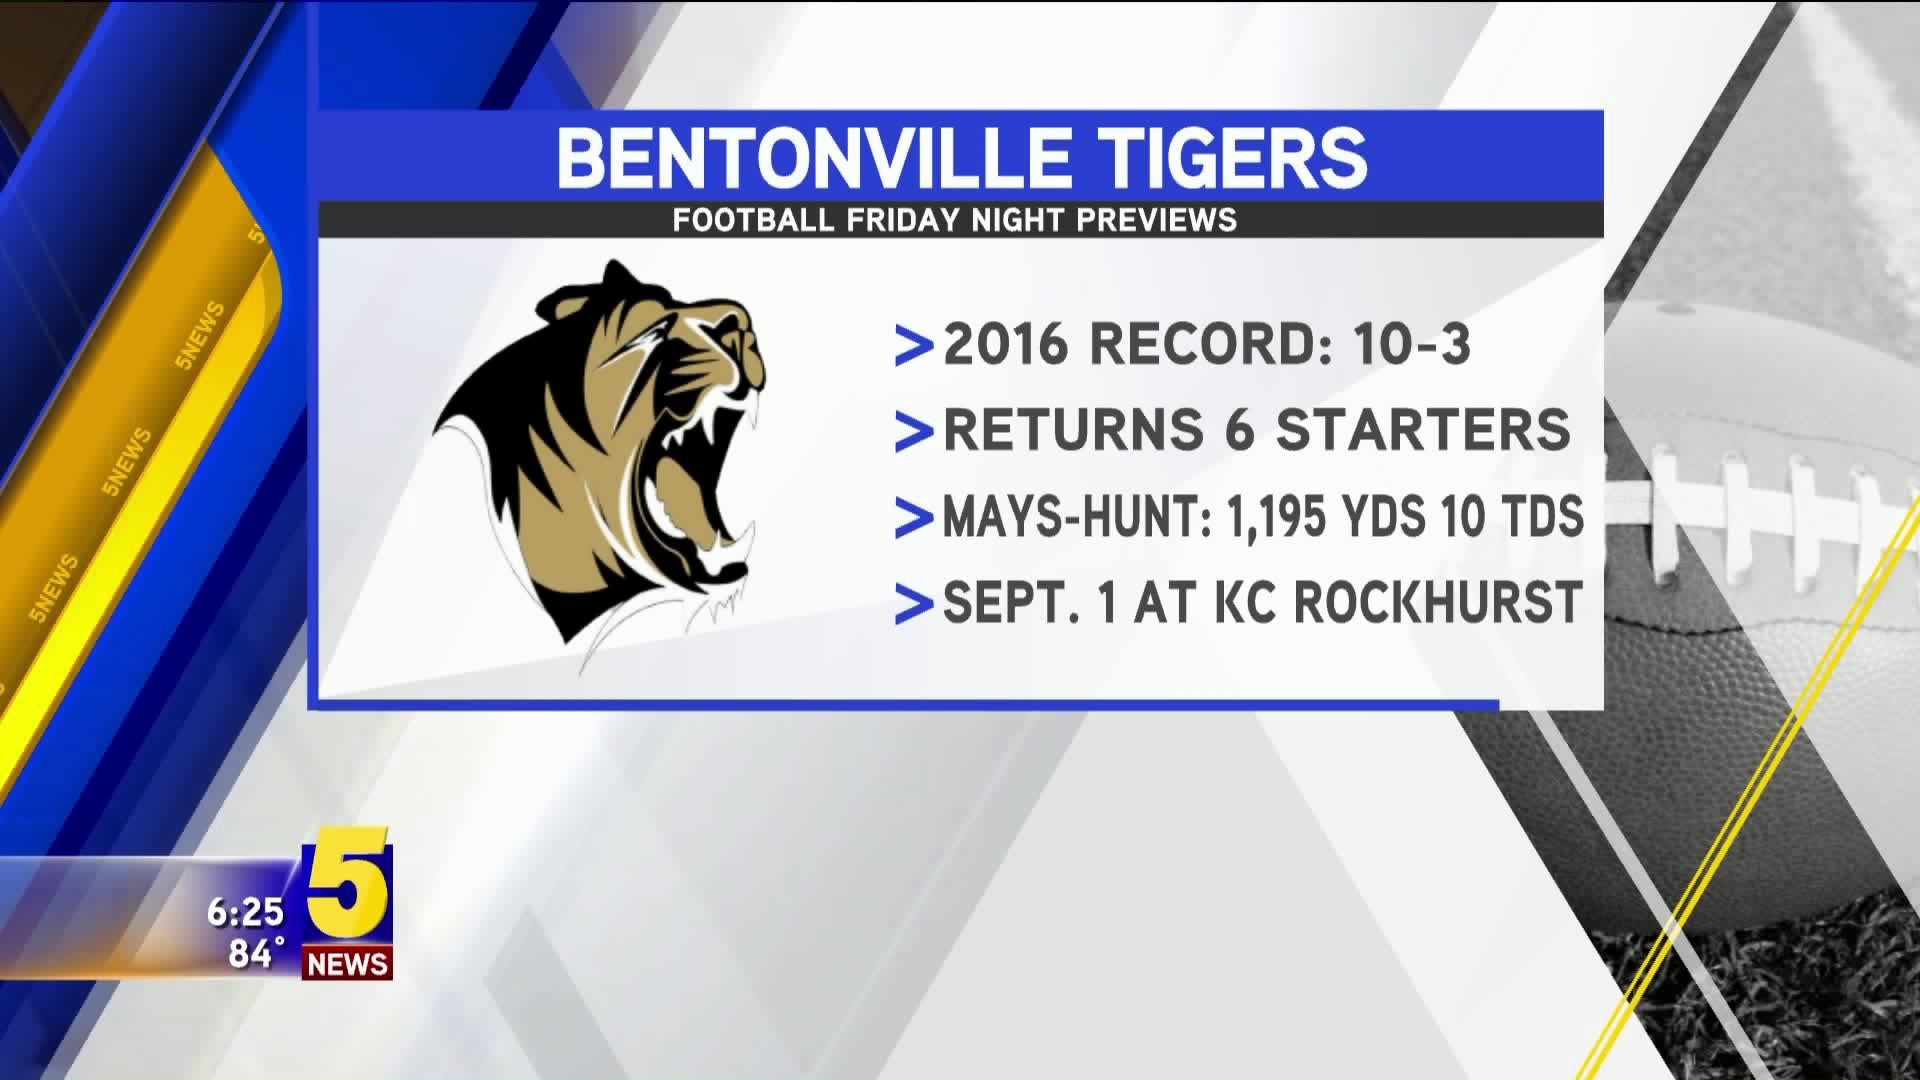 Bentonville Rallies Behind Entirely New Offensive Line